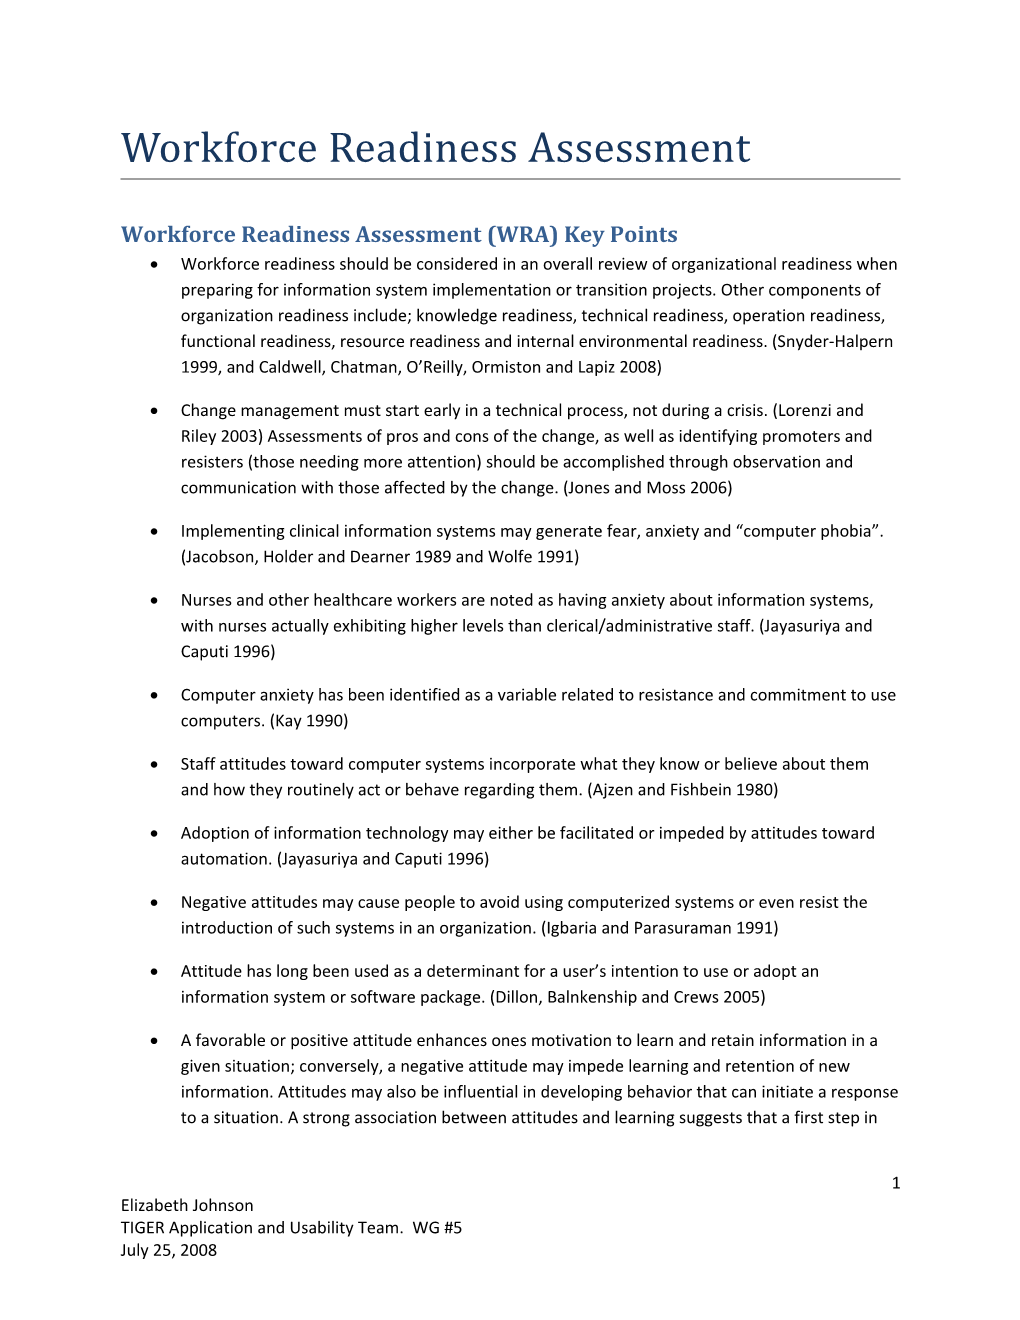 Workforce Readiness Assessment (WRA) Key Points